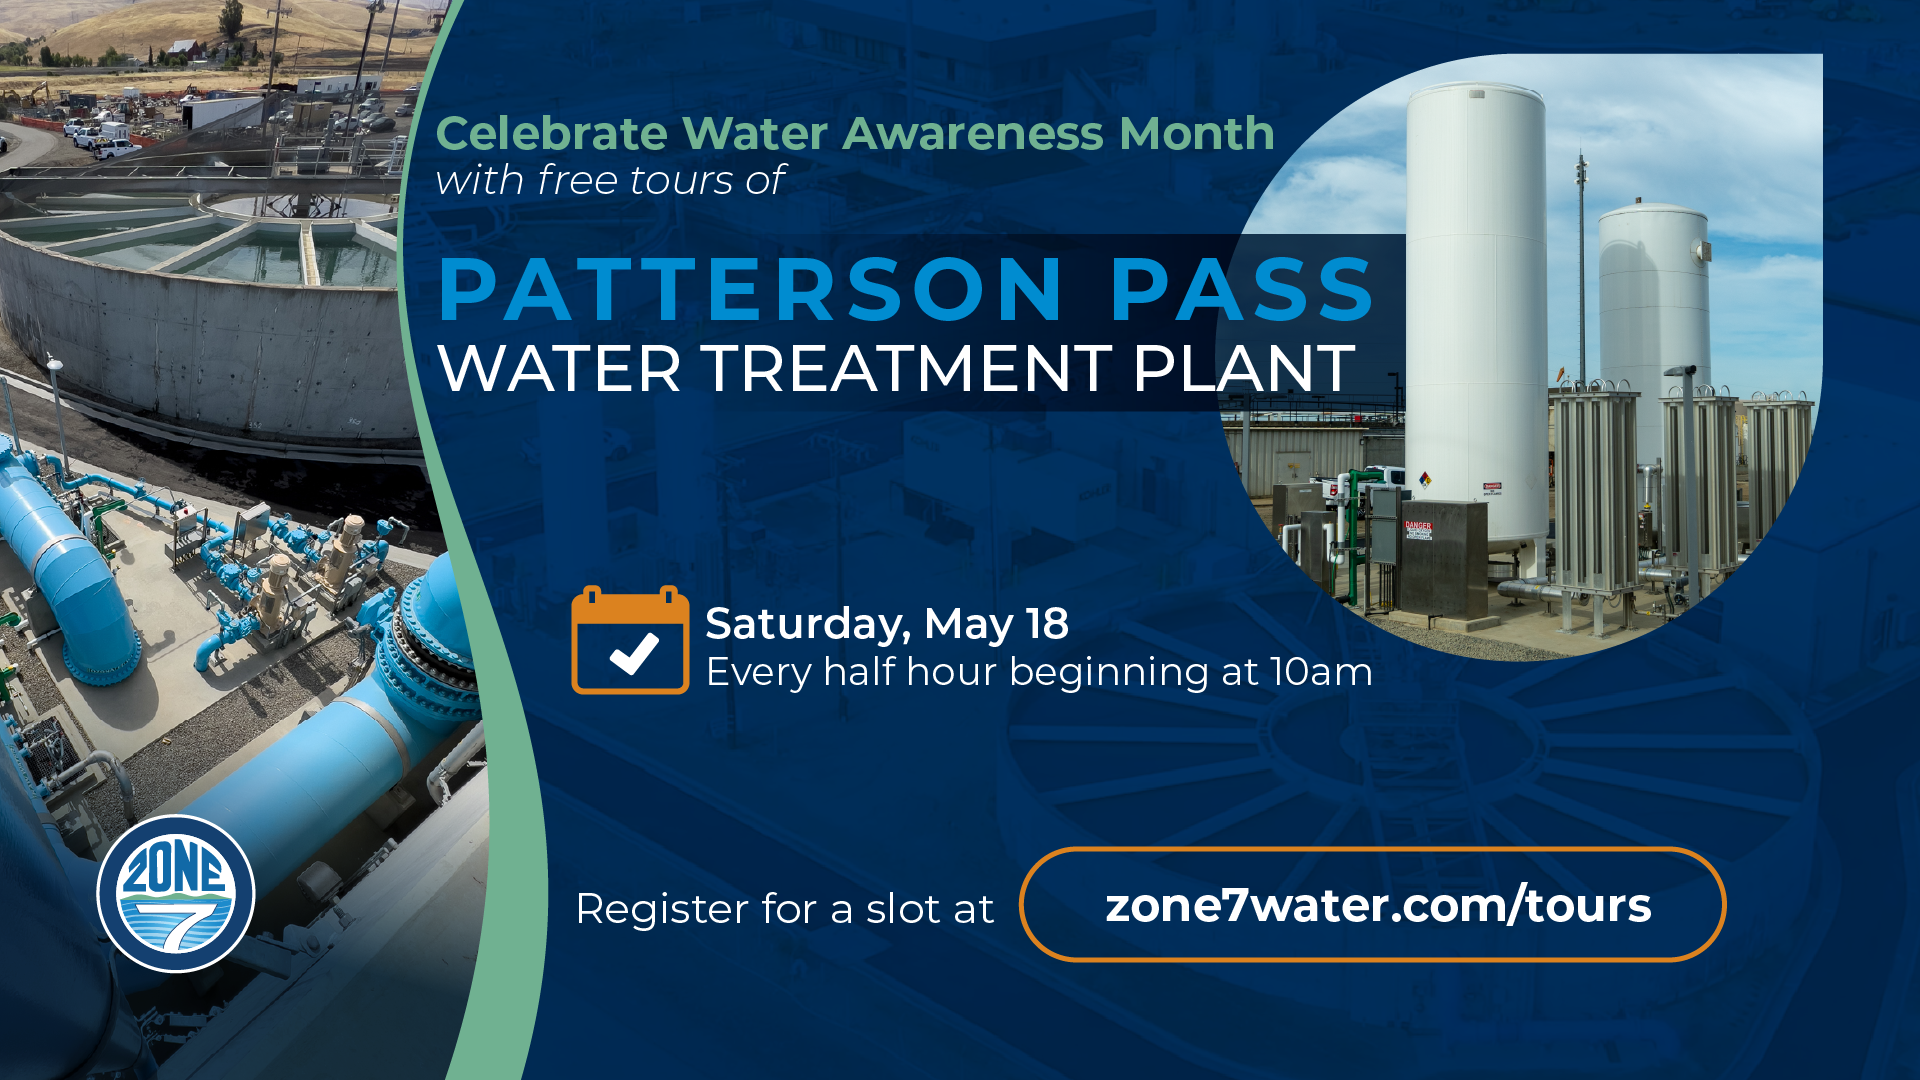 TOUR THE UPGRADED PATTERSON PASS WATER TREATMENT FACILITY